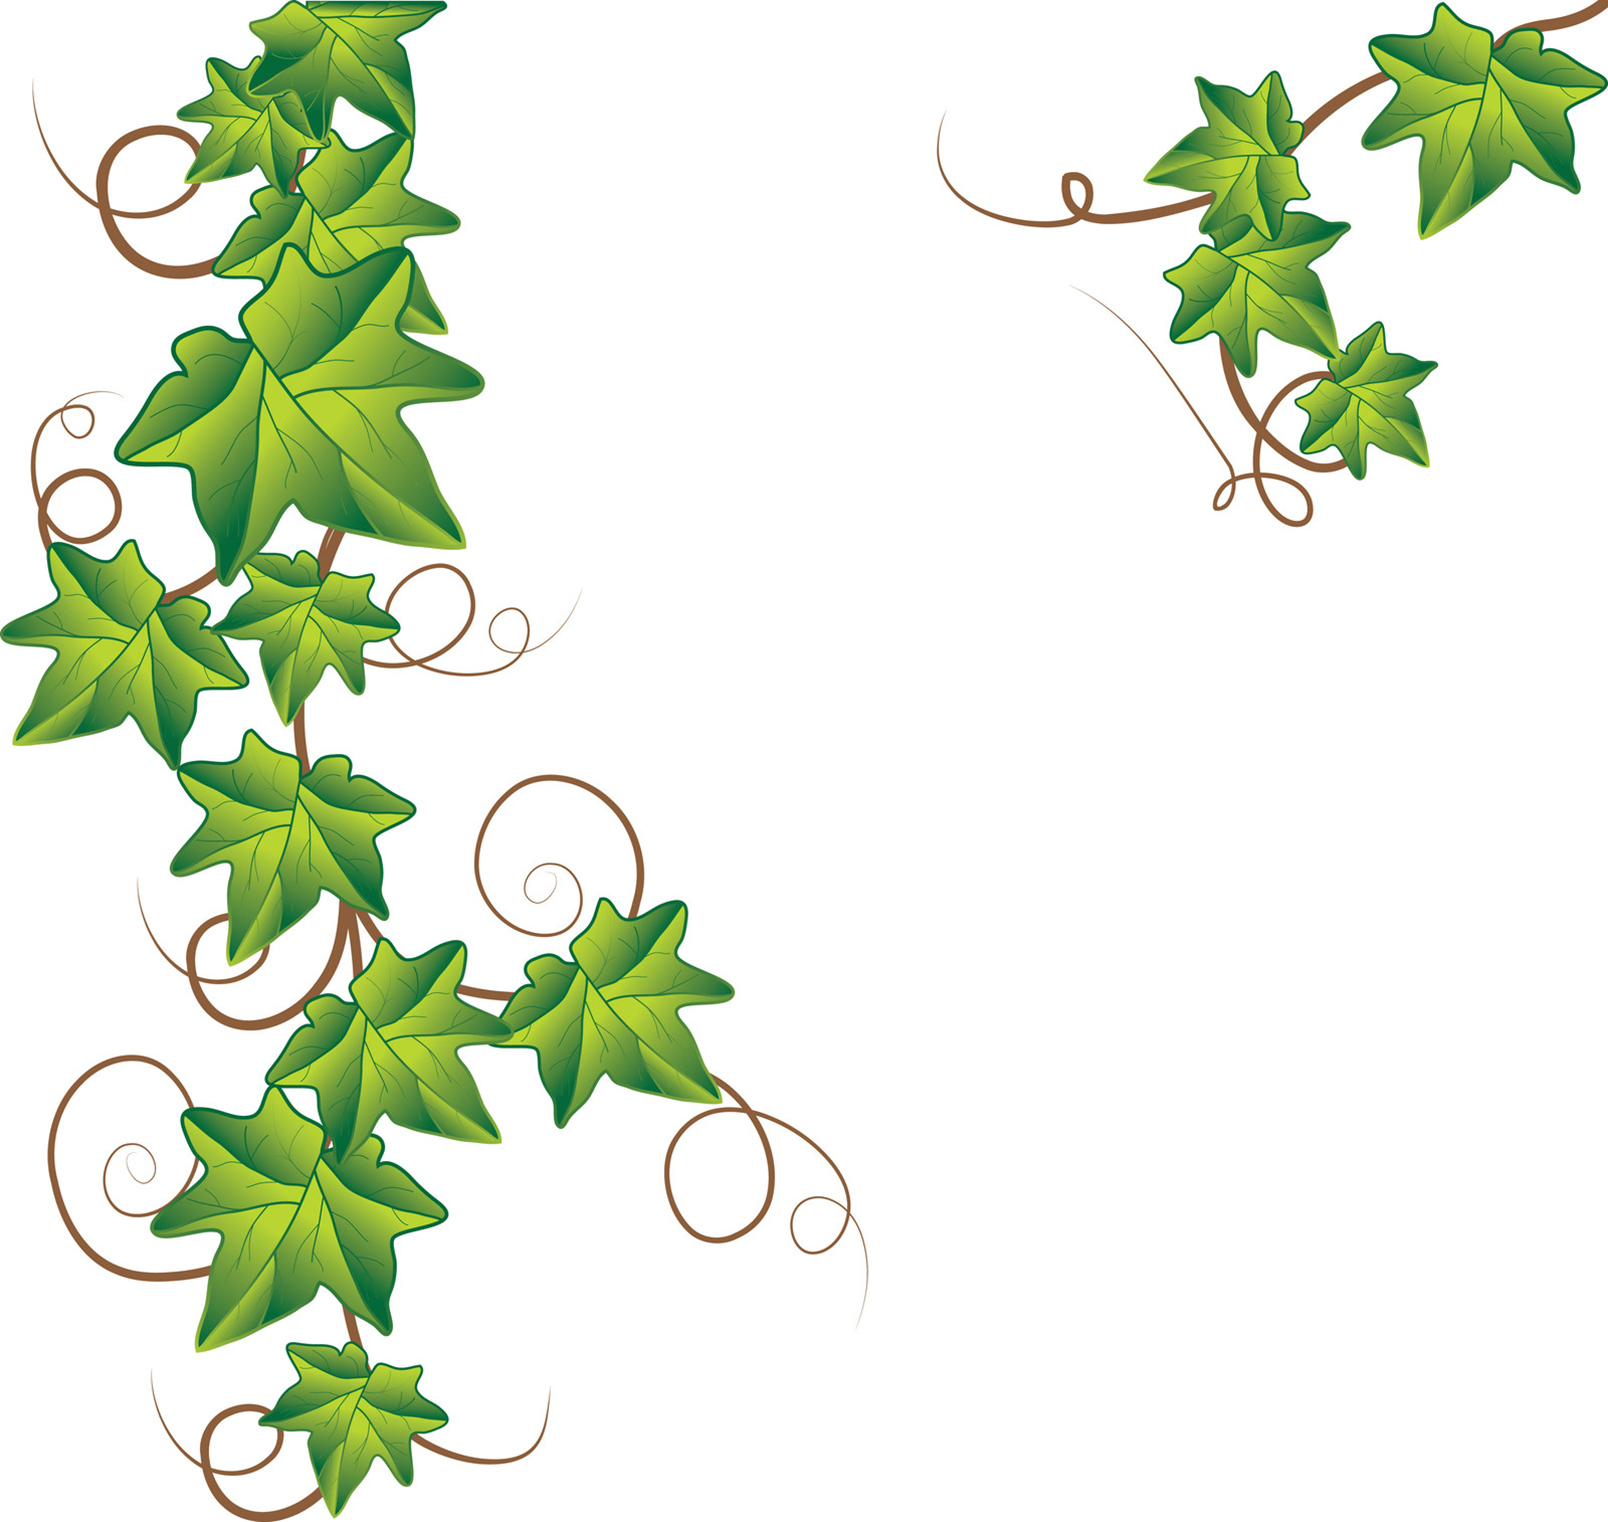 Free Ivy Cliparts, Download Free Clip Art, Free Clip Art on.